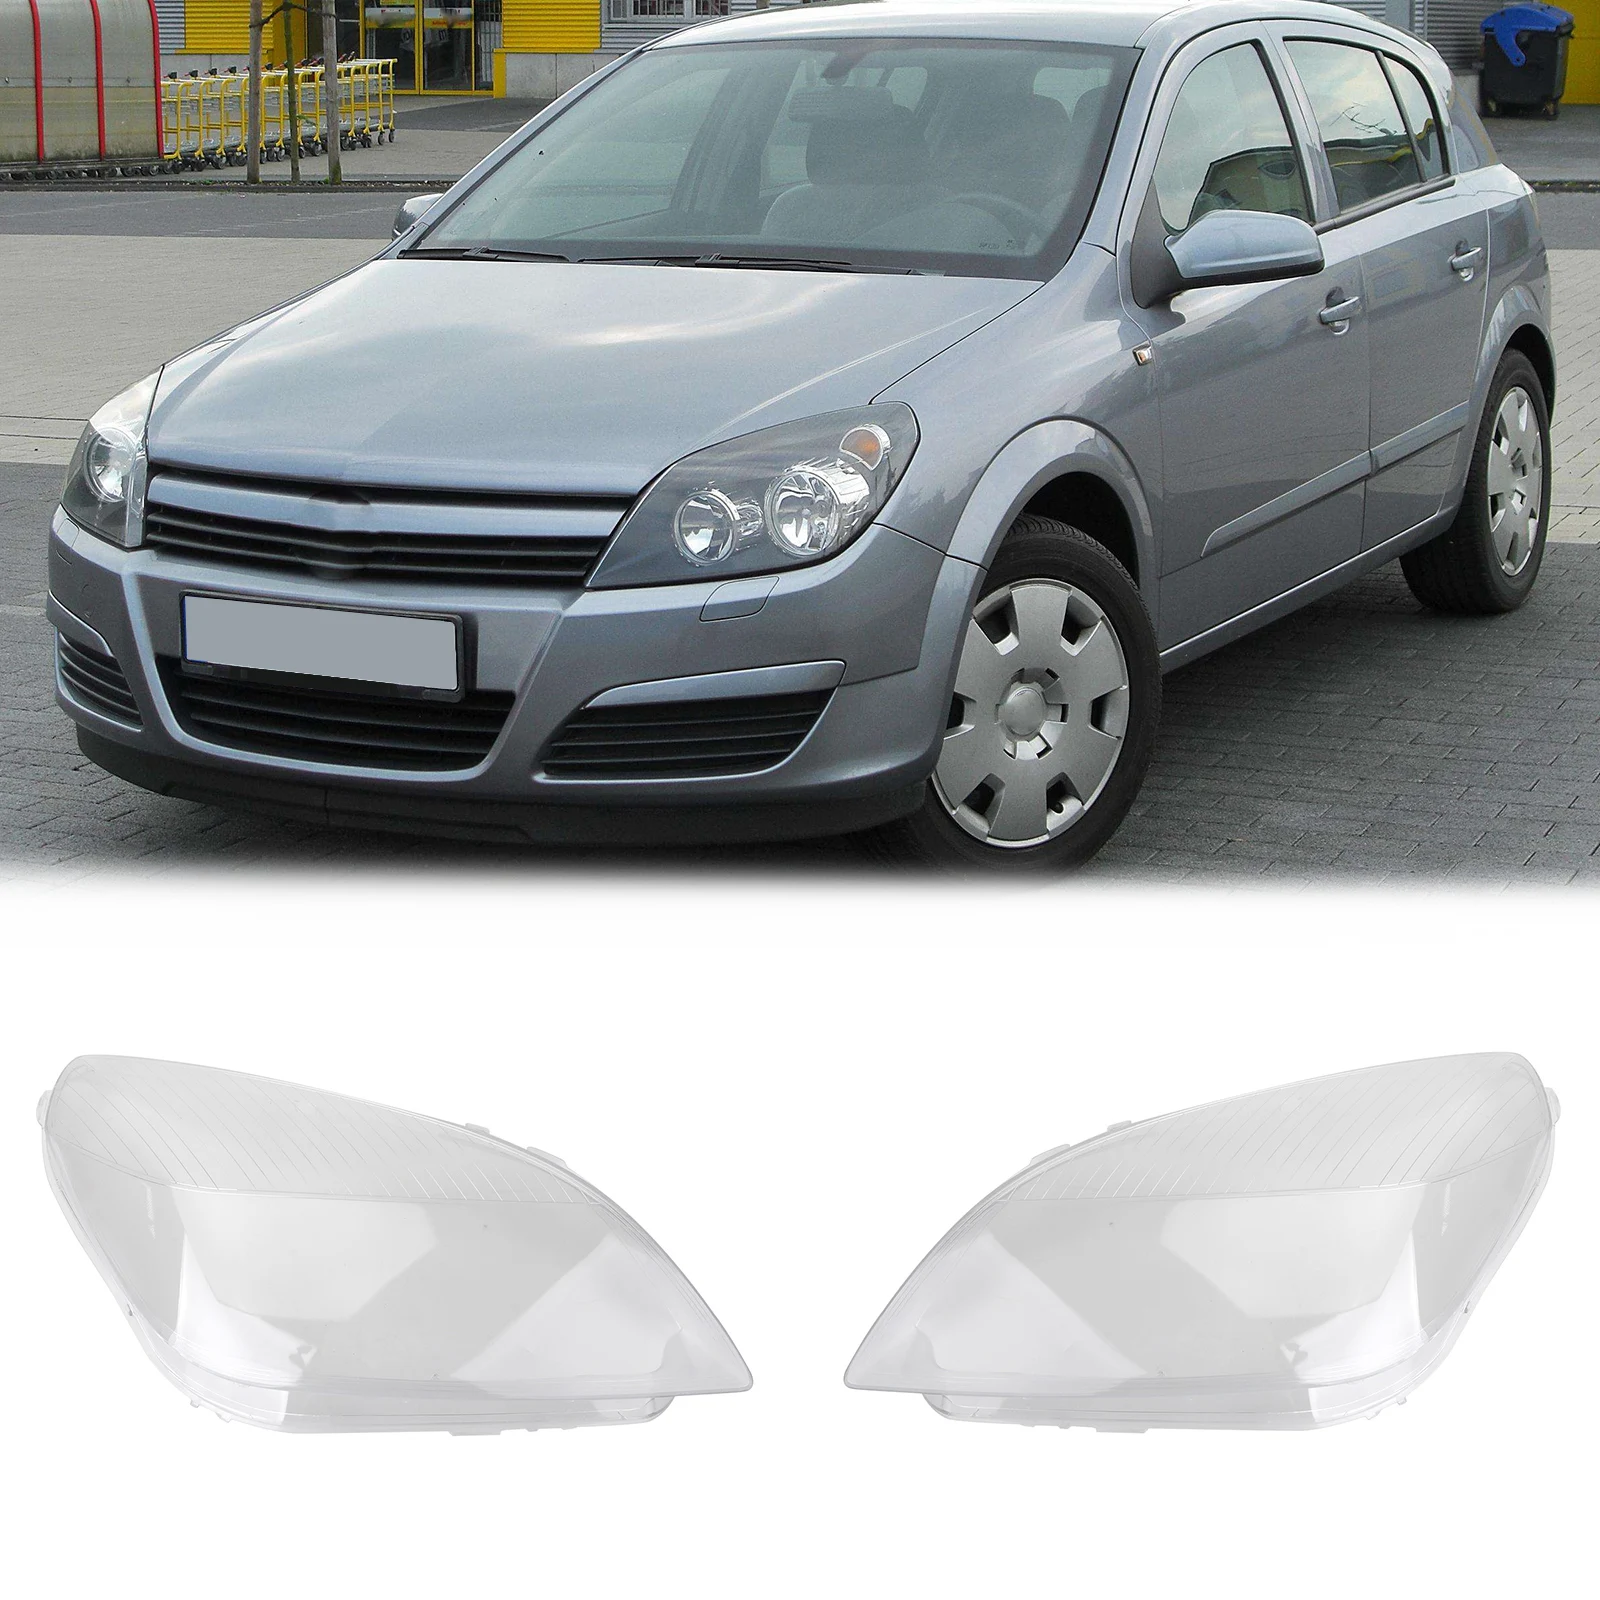 

Areyourshop Left + Right Headlight Headlamp Lens Cover Fits For Astra Vauxhall H Mk5 2004-2010, Clear